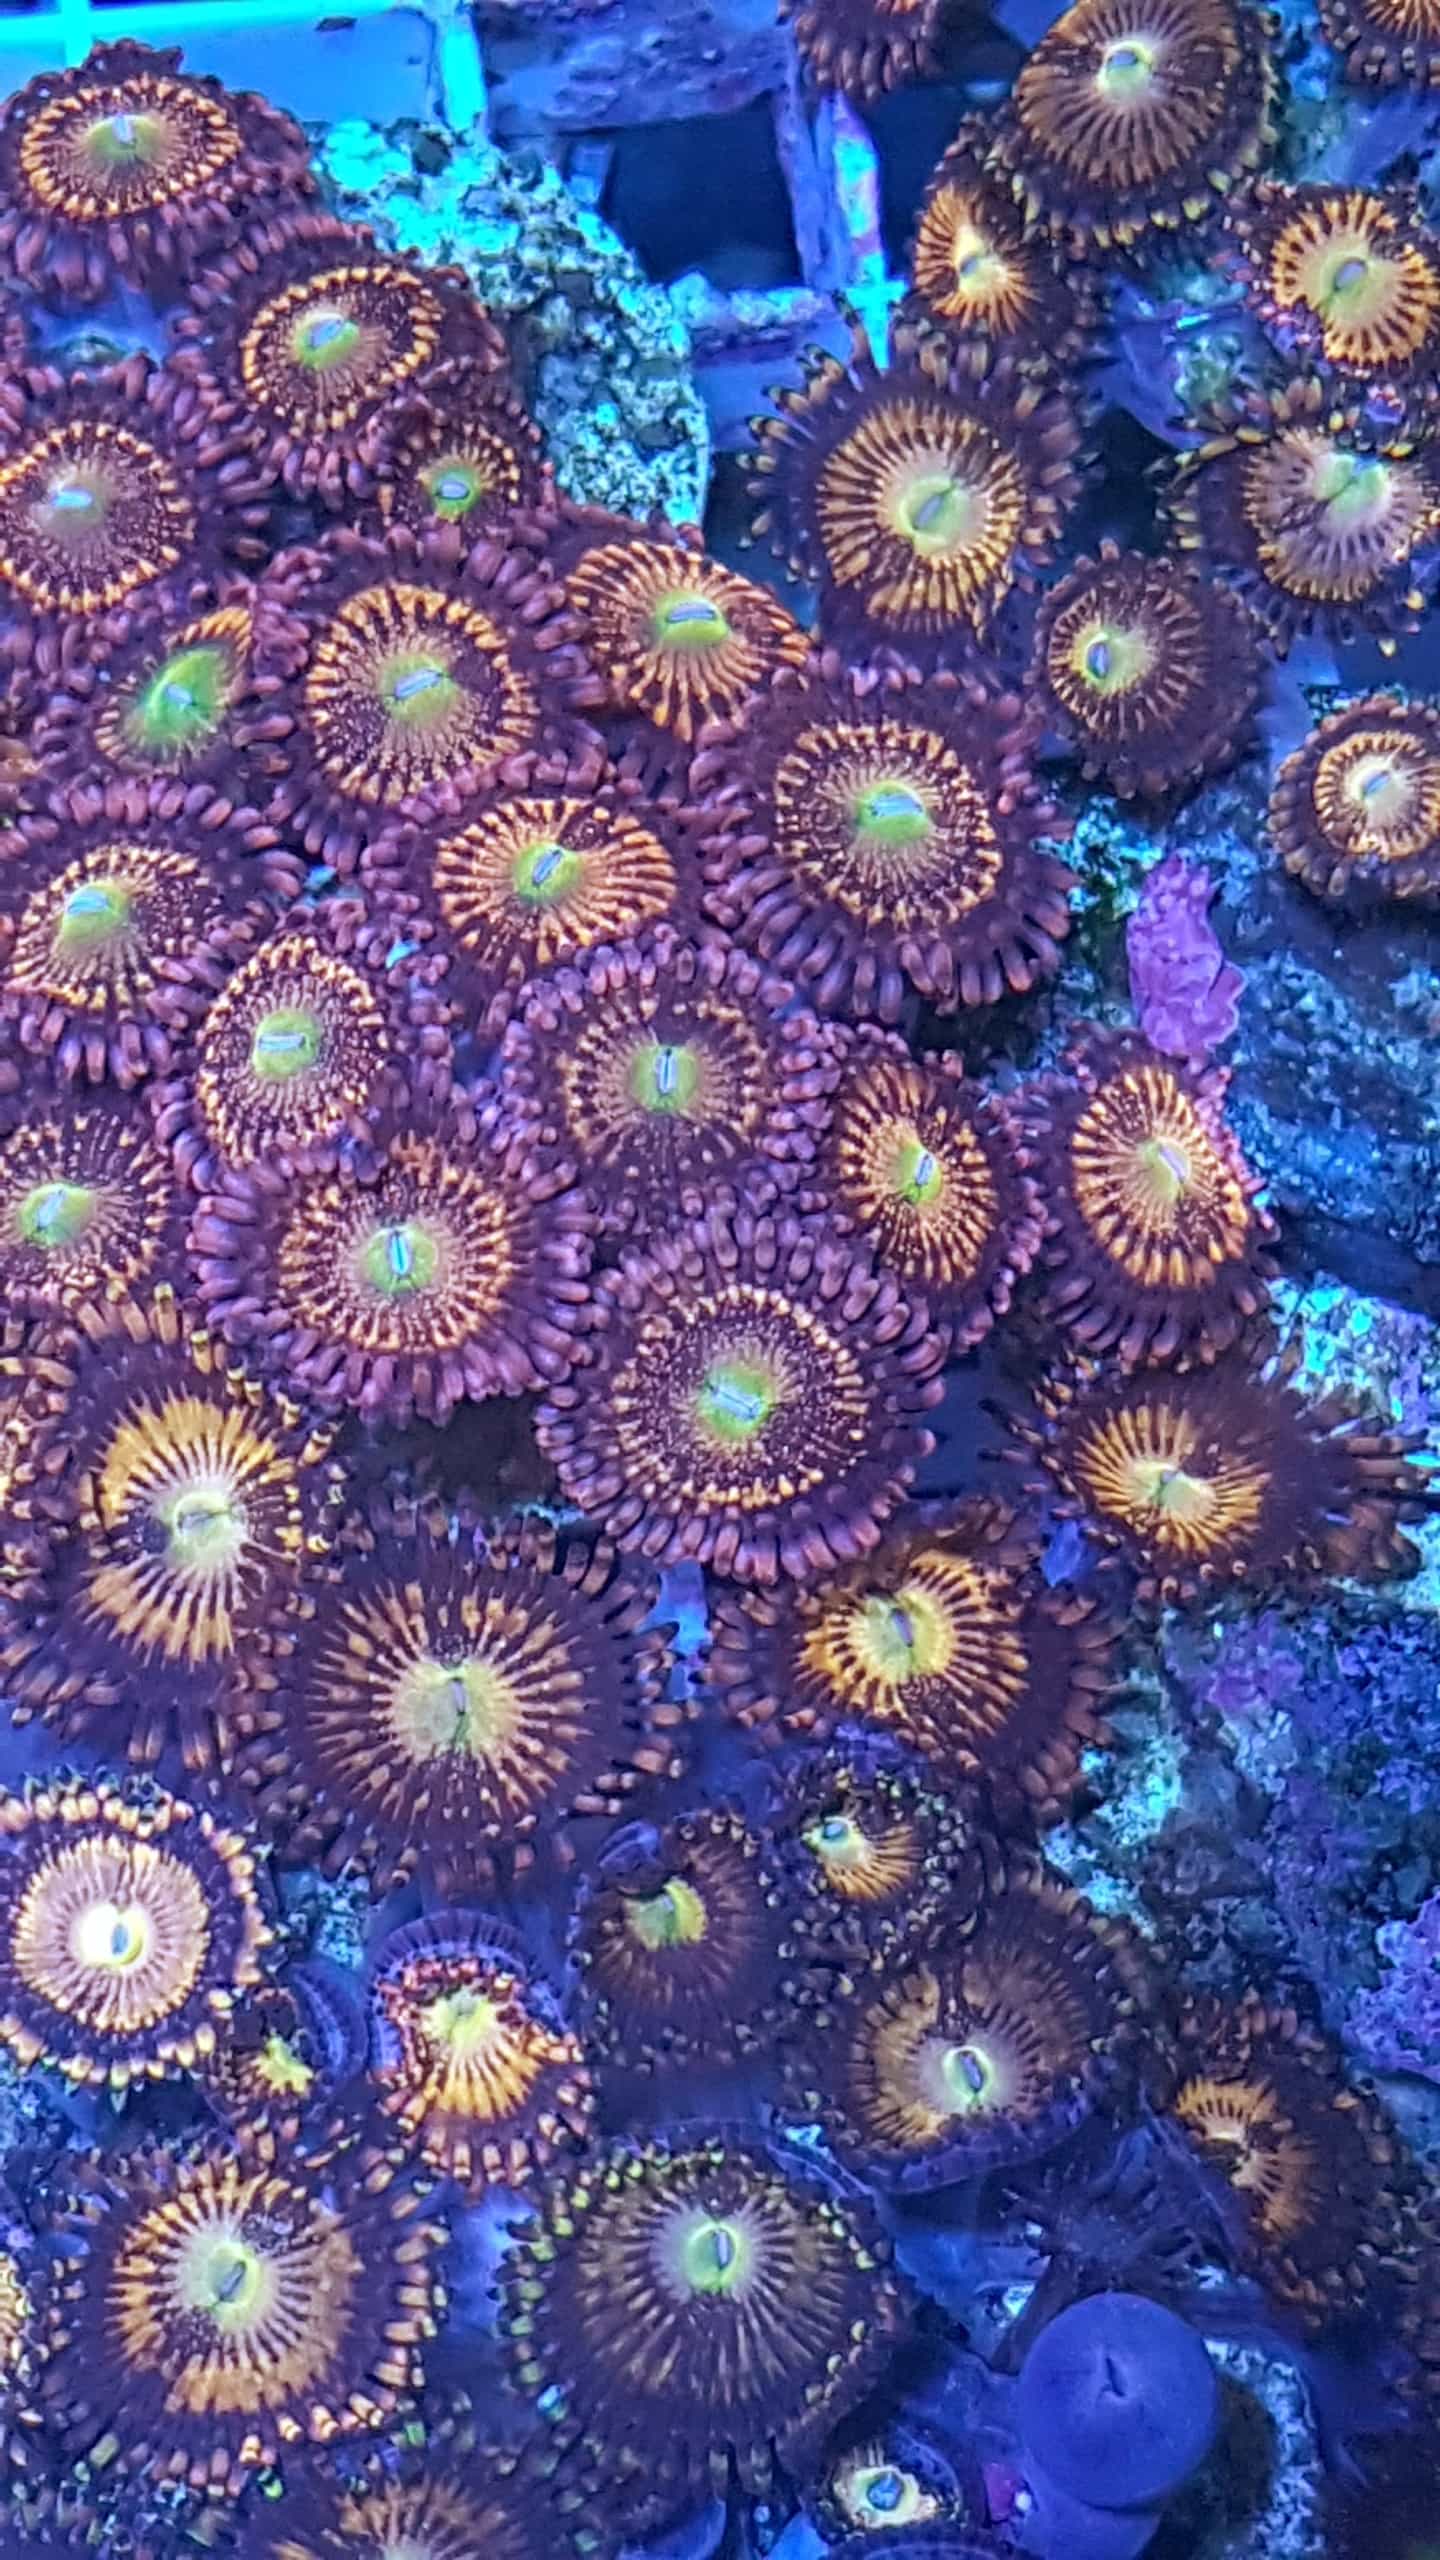 Zoa/Paly Rainbow Incerator mind 4 Polypen